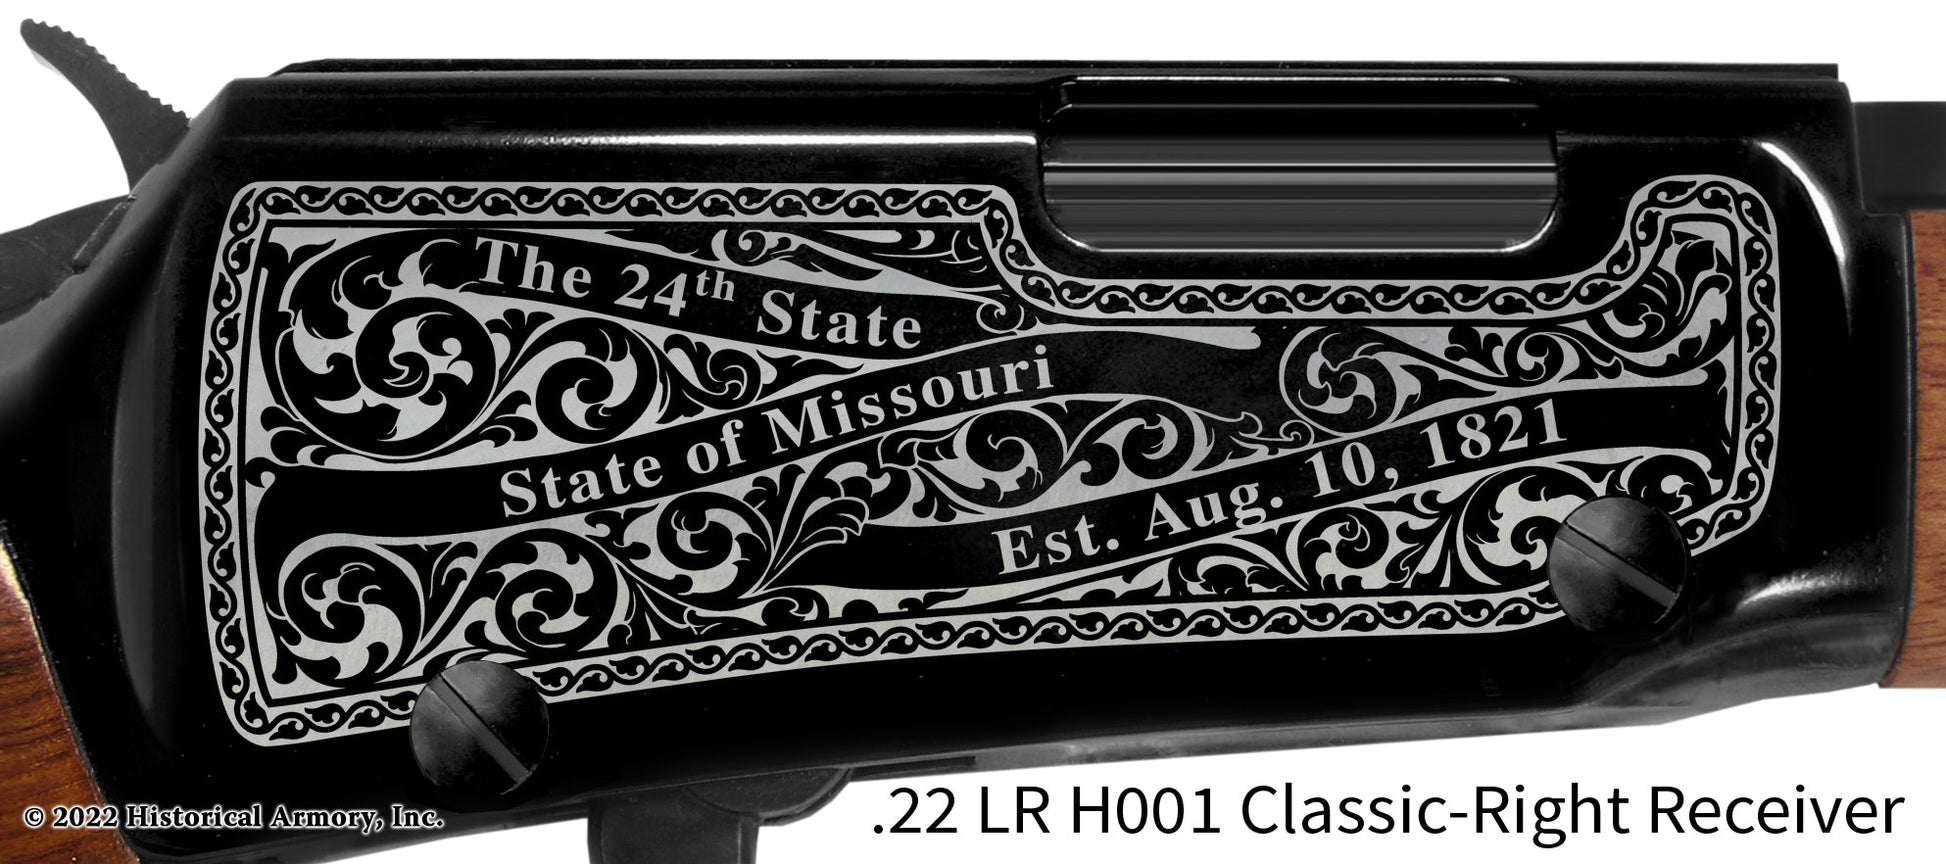 Cape Girardeau County Missouri Engraved Henry H001 Rifle